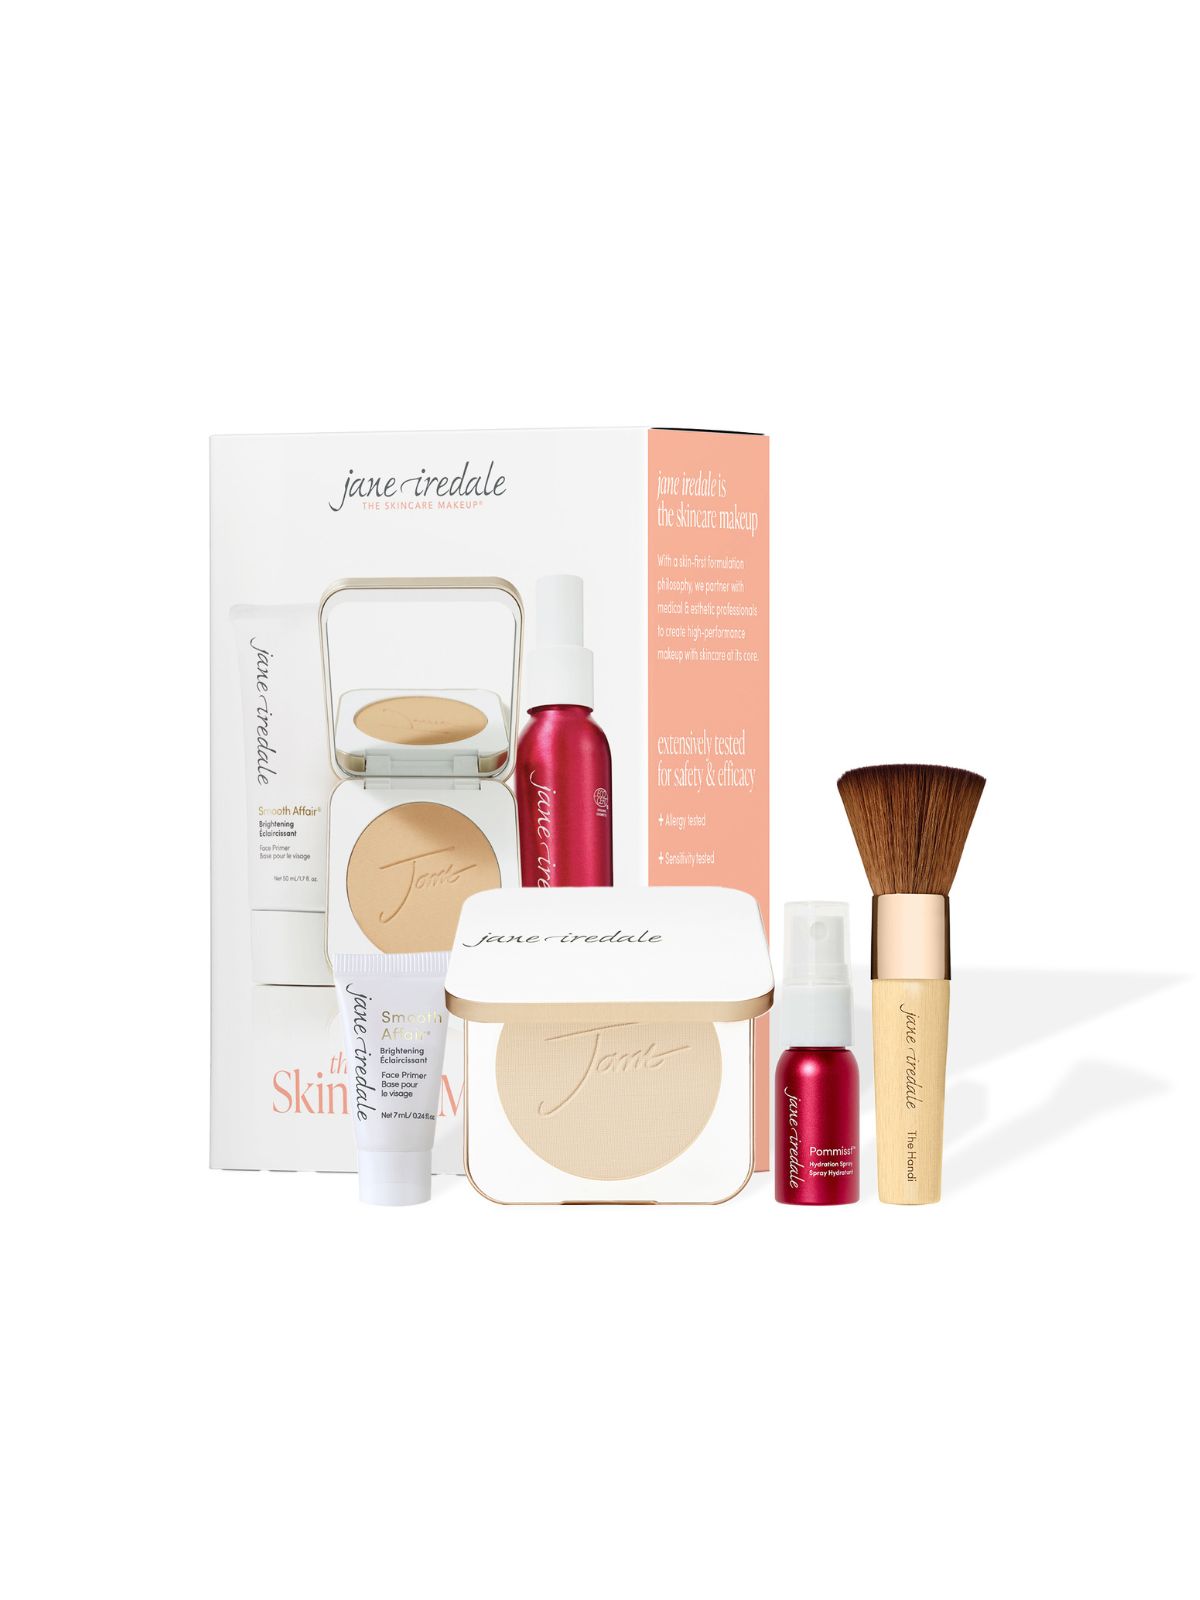 Jane Iredale The Skincare Makeup System Value Box